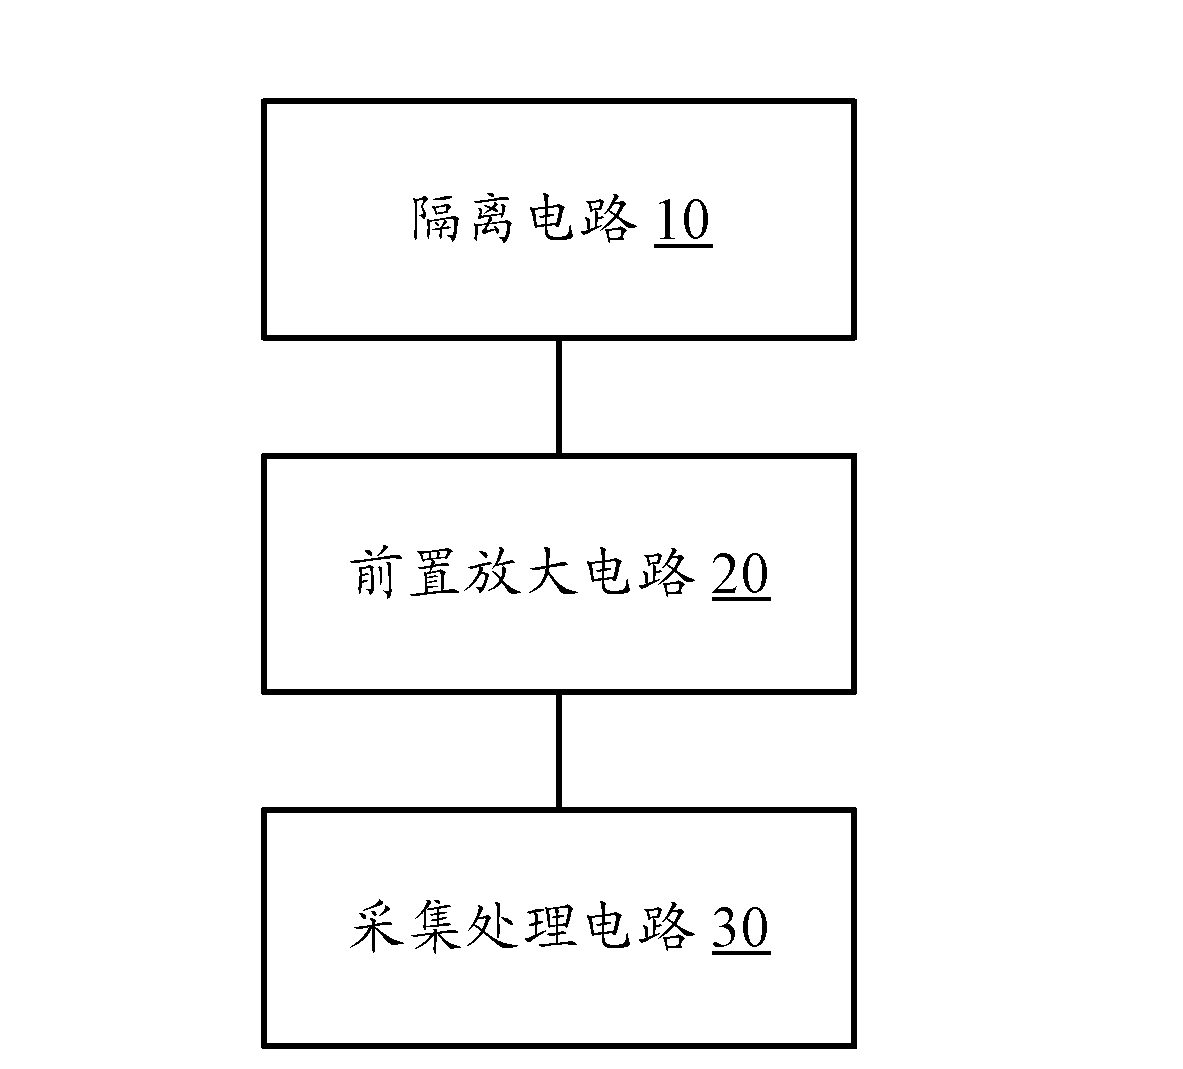 Signal processing device for nuclear magnetic resonance logger